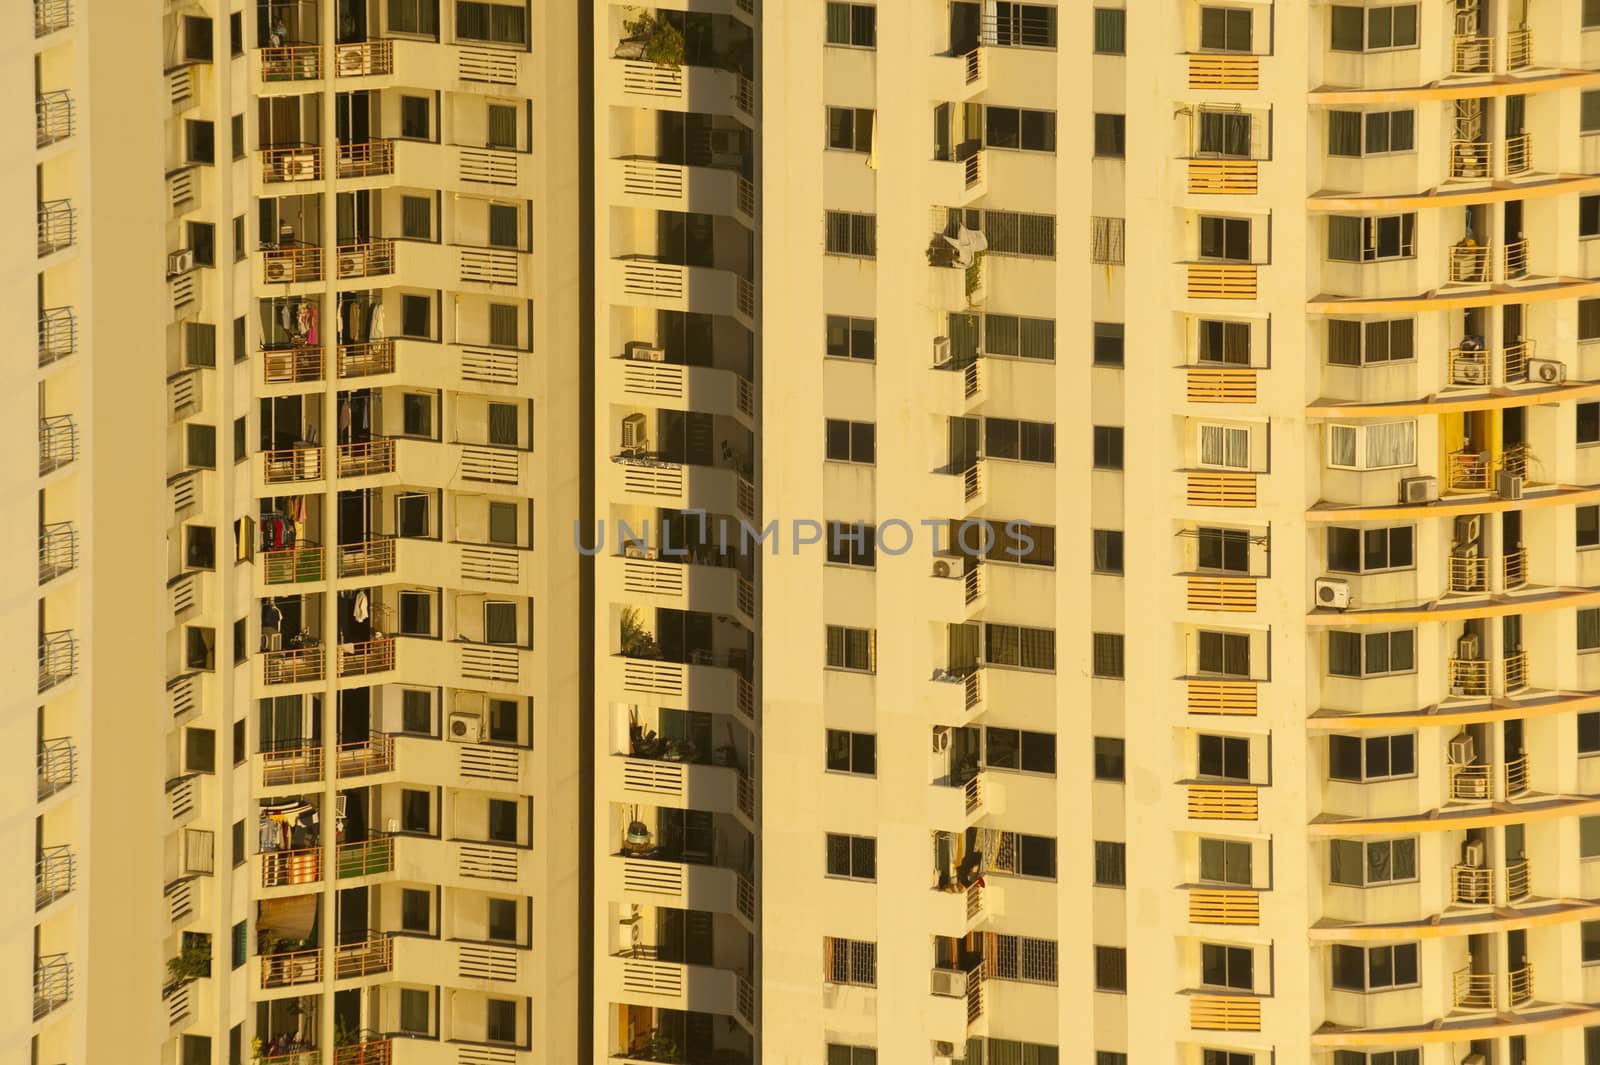 Condominium with sunset in Bangkok, Thailand. by think4photop